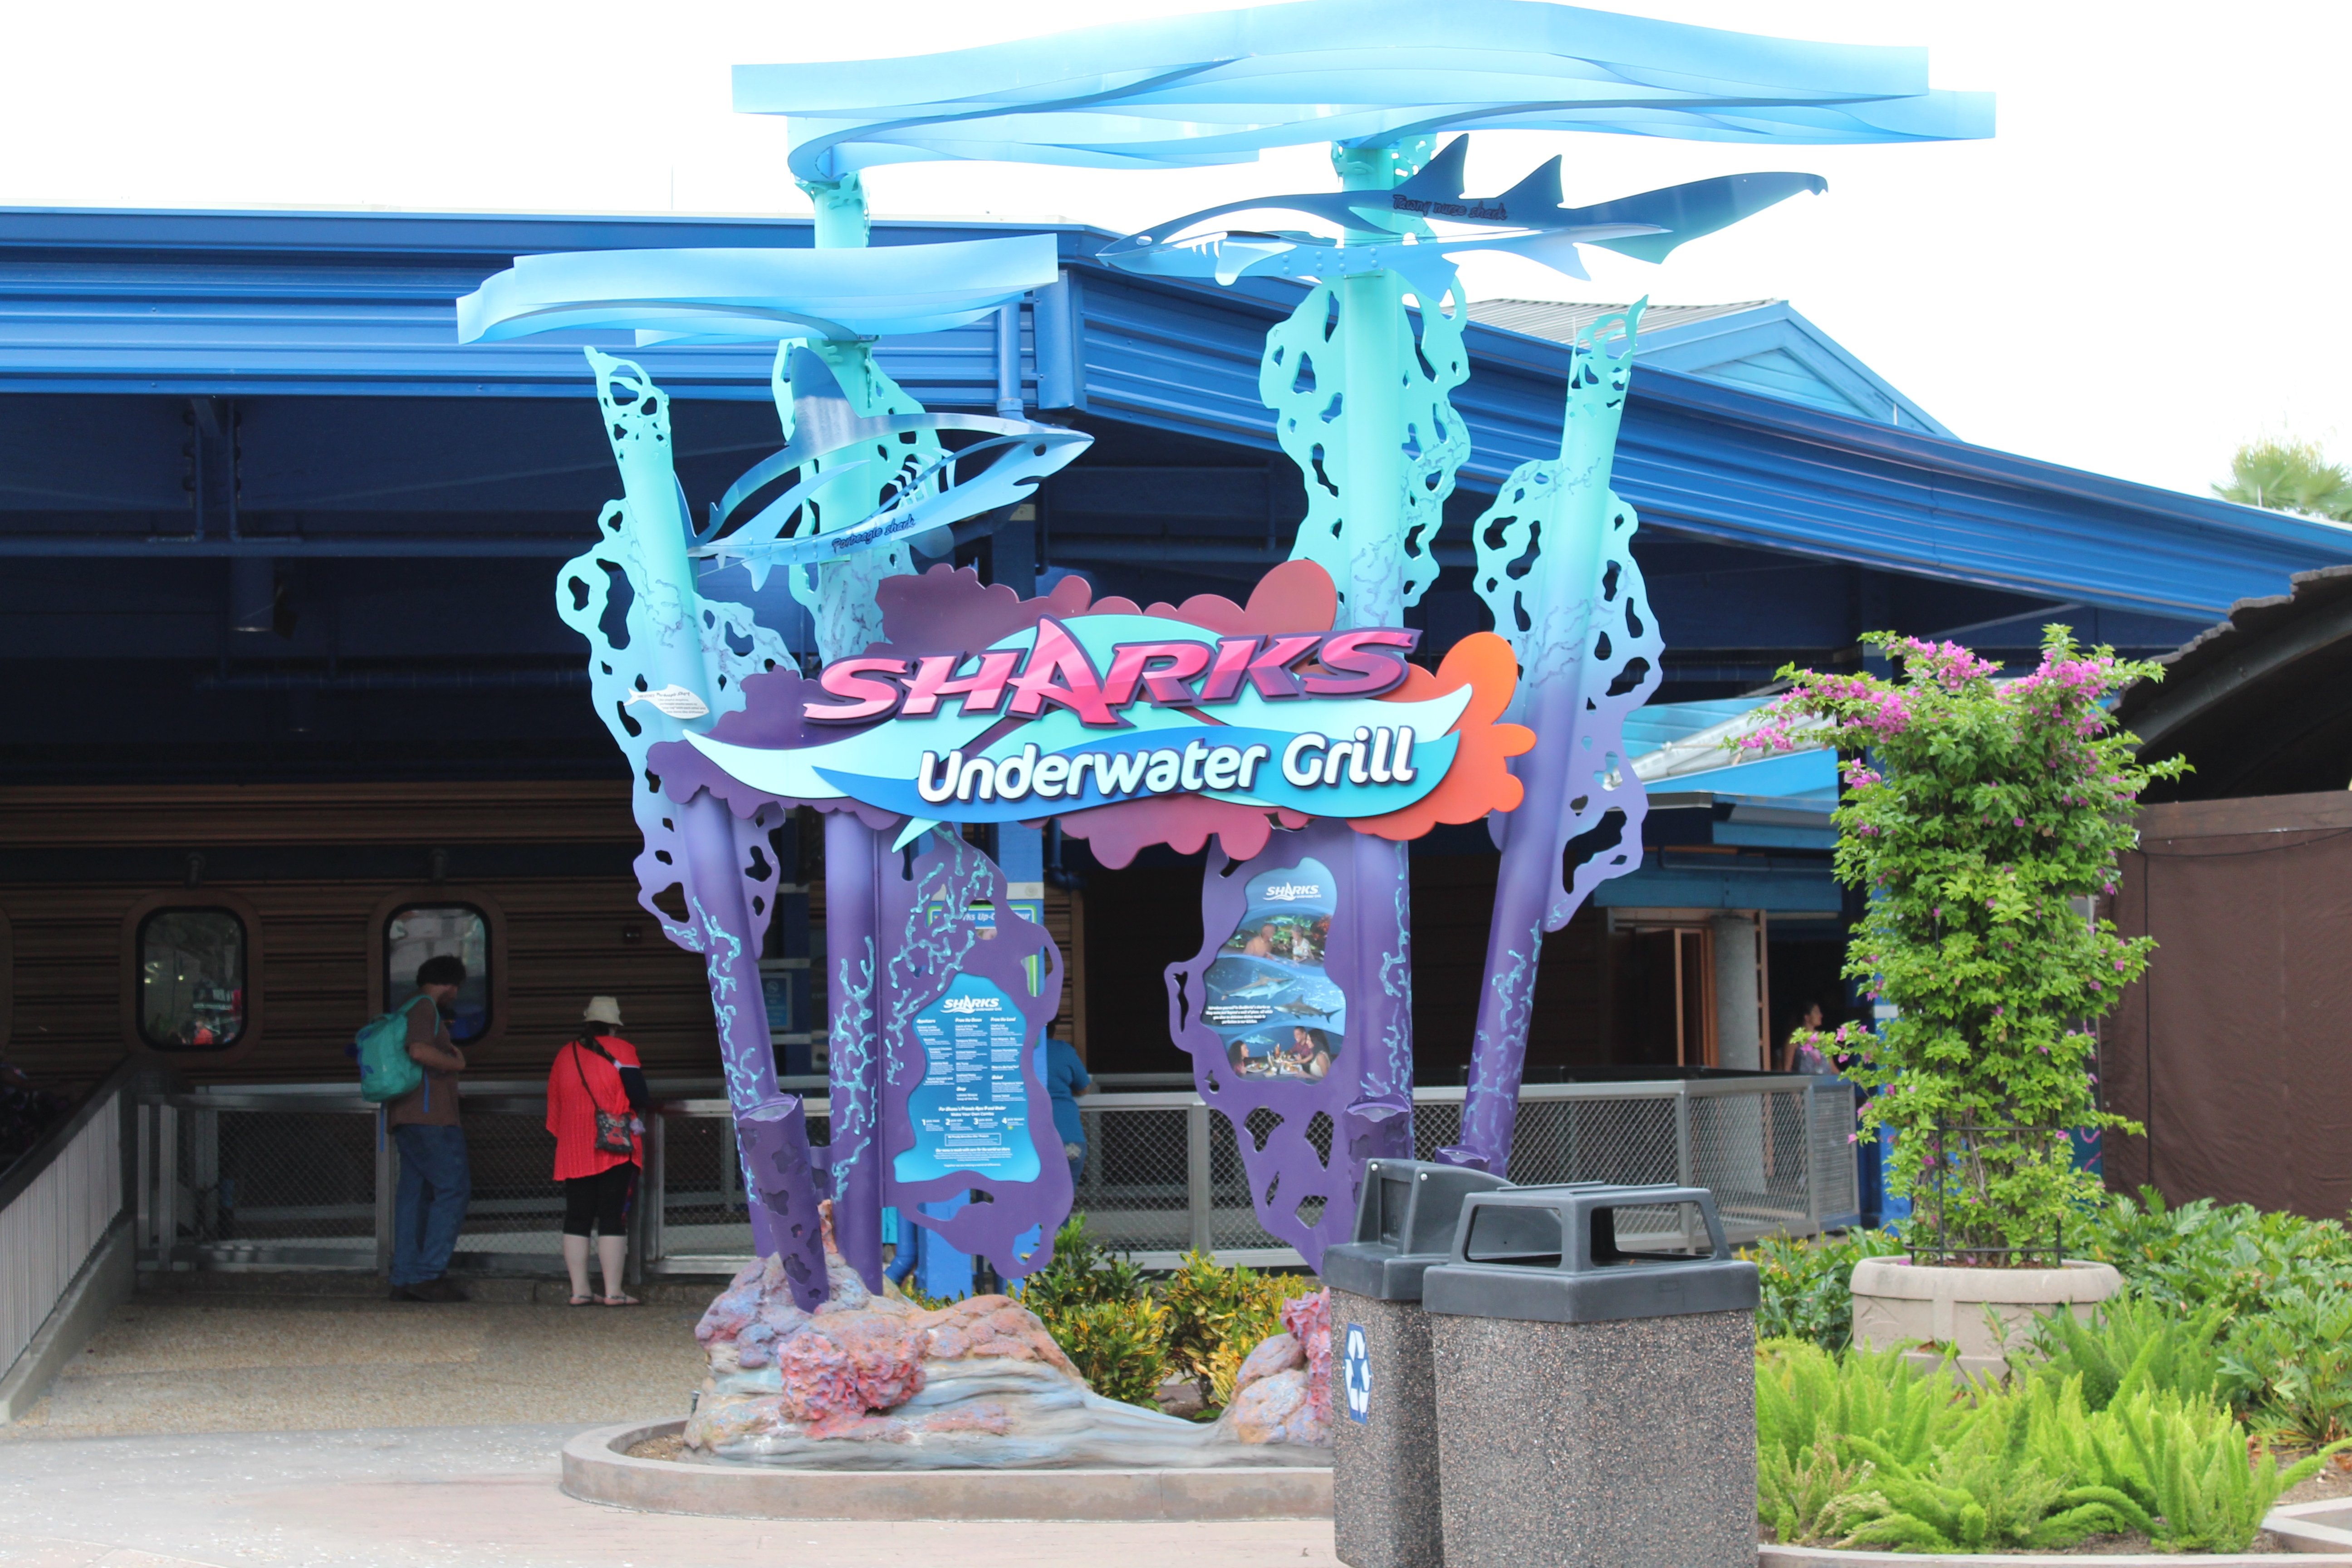 Food, Dining Deal, Menus - What to Eat at SeaWorld, Orlando - Yorkshire